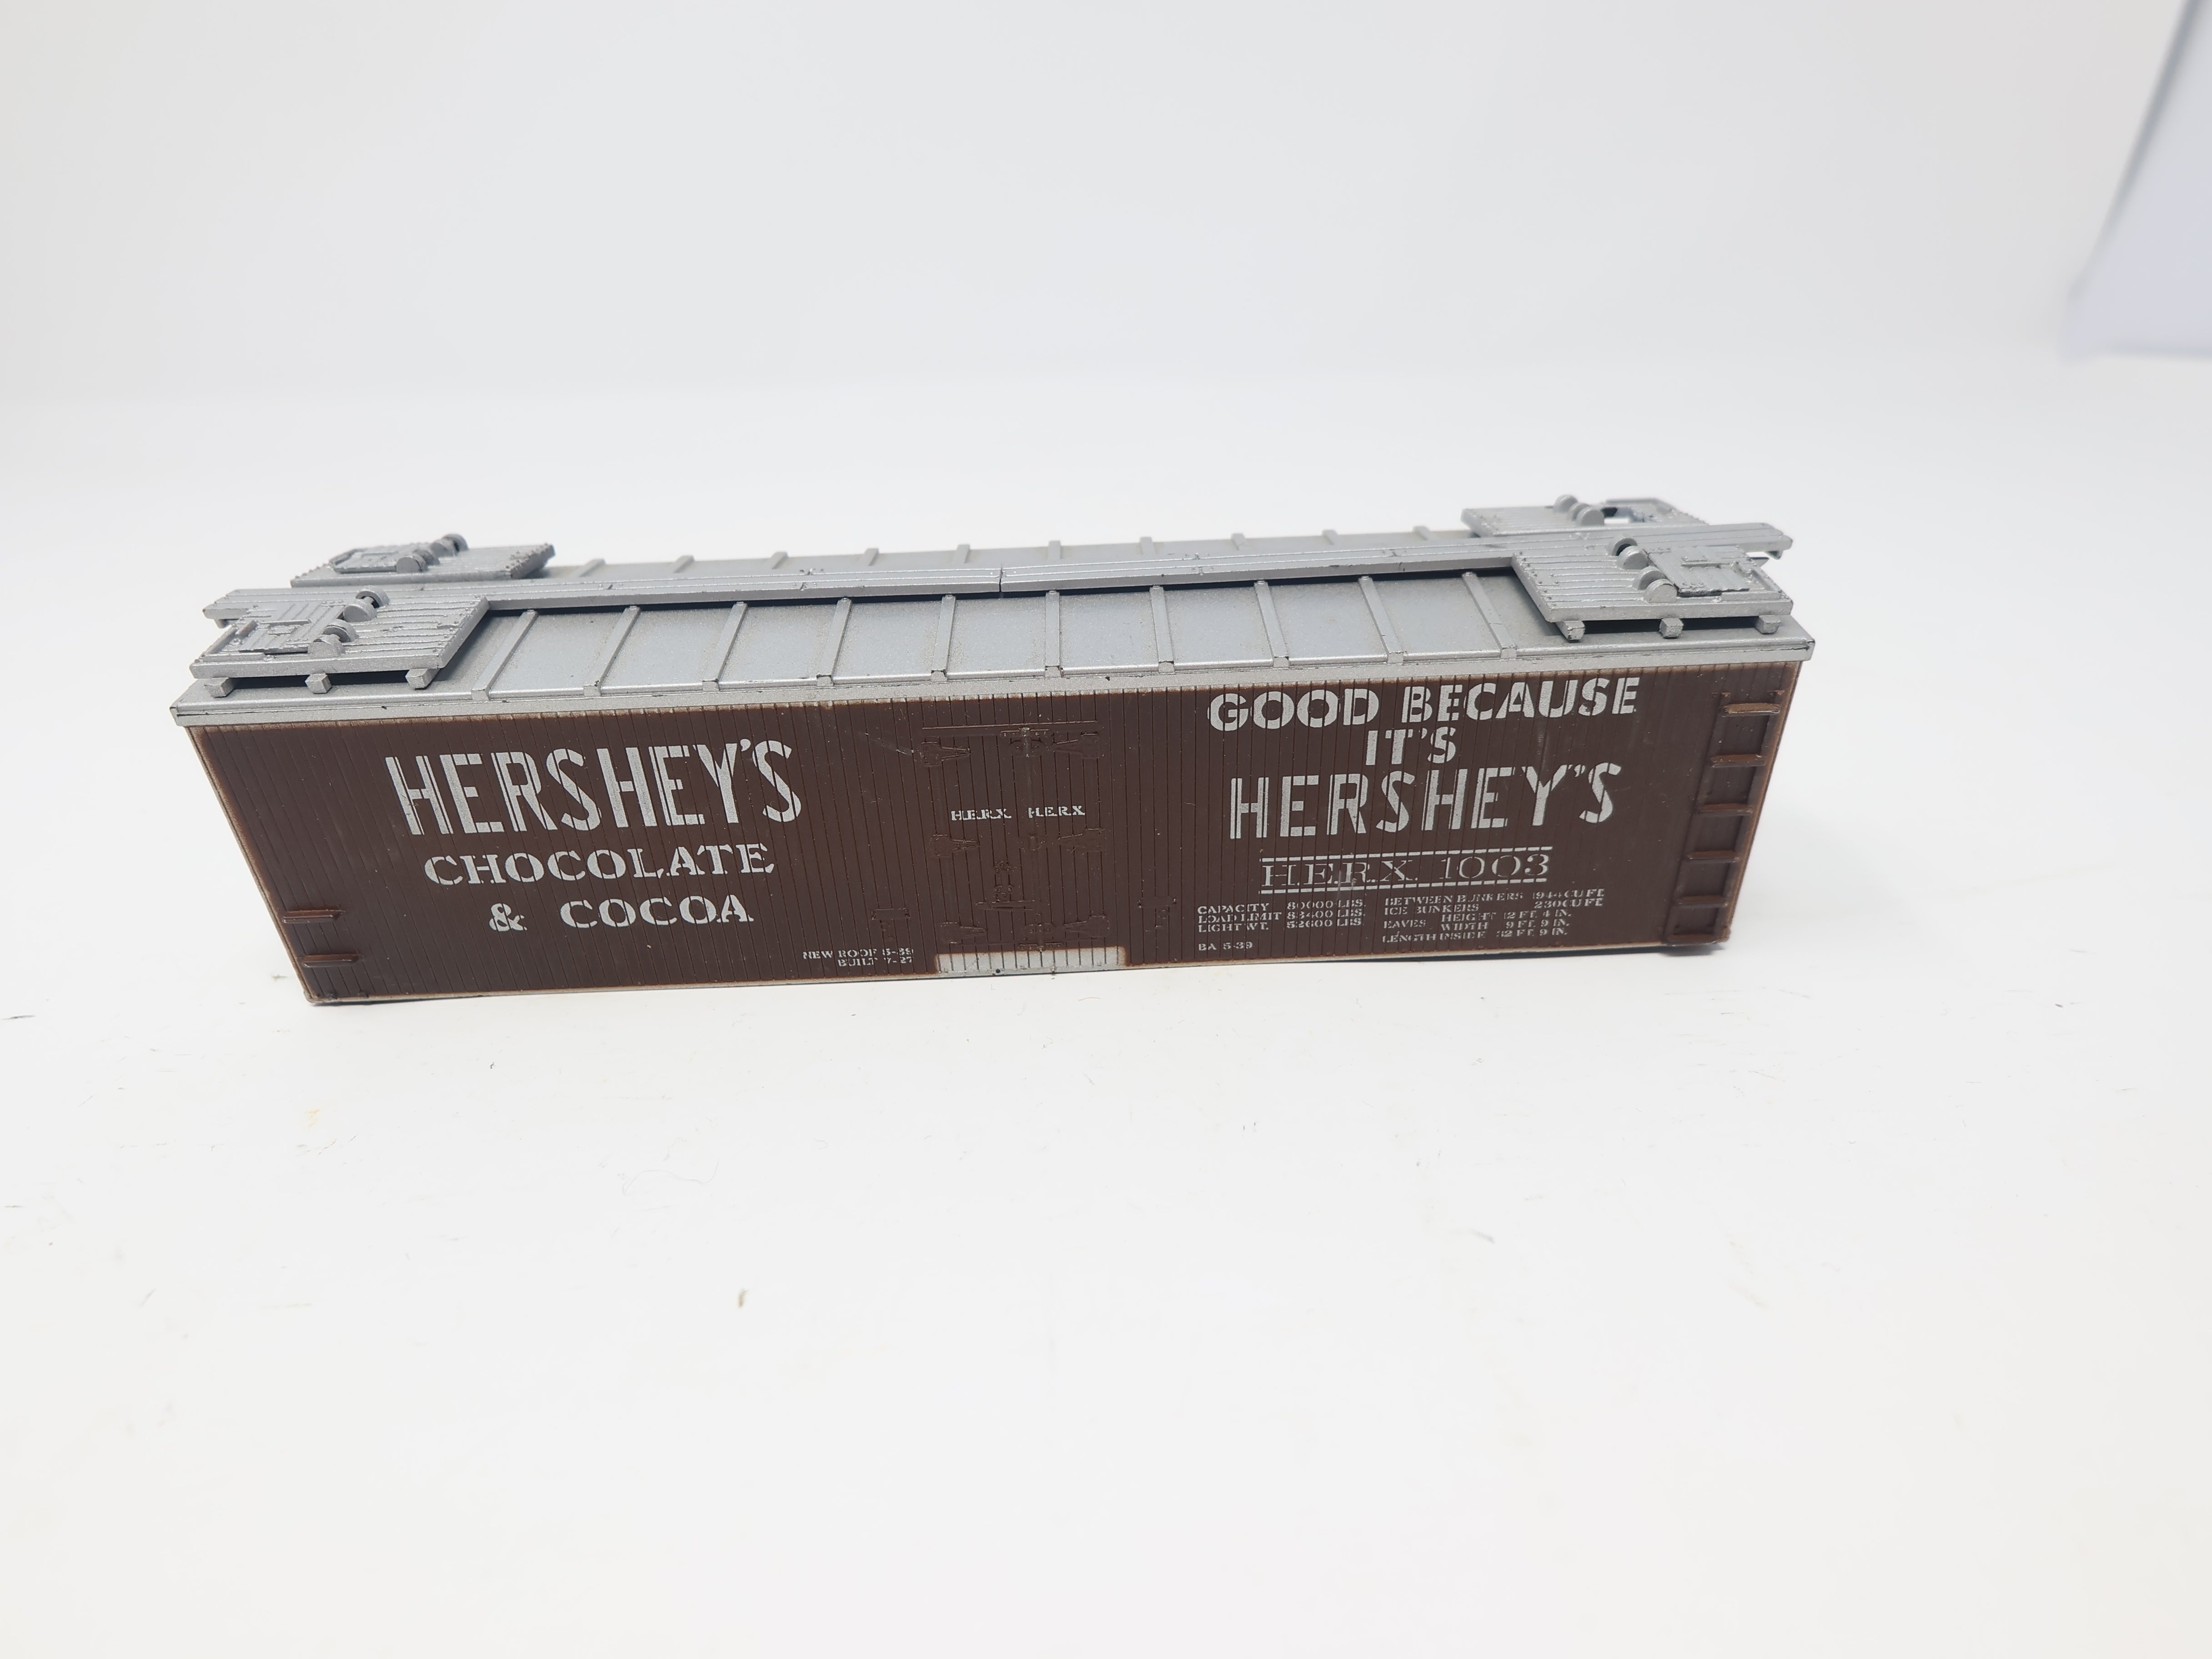 USED TRAIN MINIATURE HO Scale, 40' Wooden Reefer Box Car, Hershey's HERX #1003, Shell Only